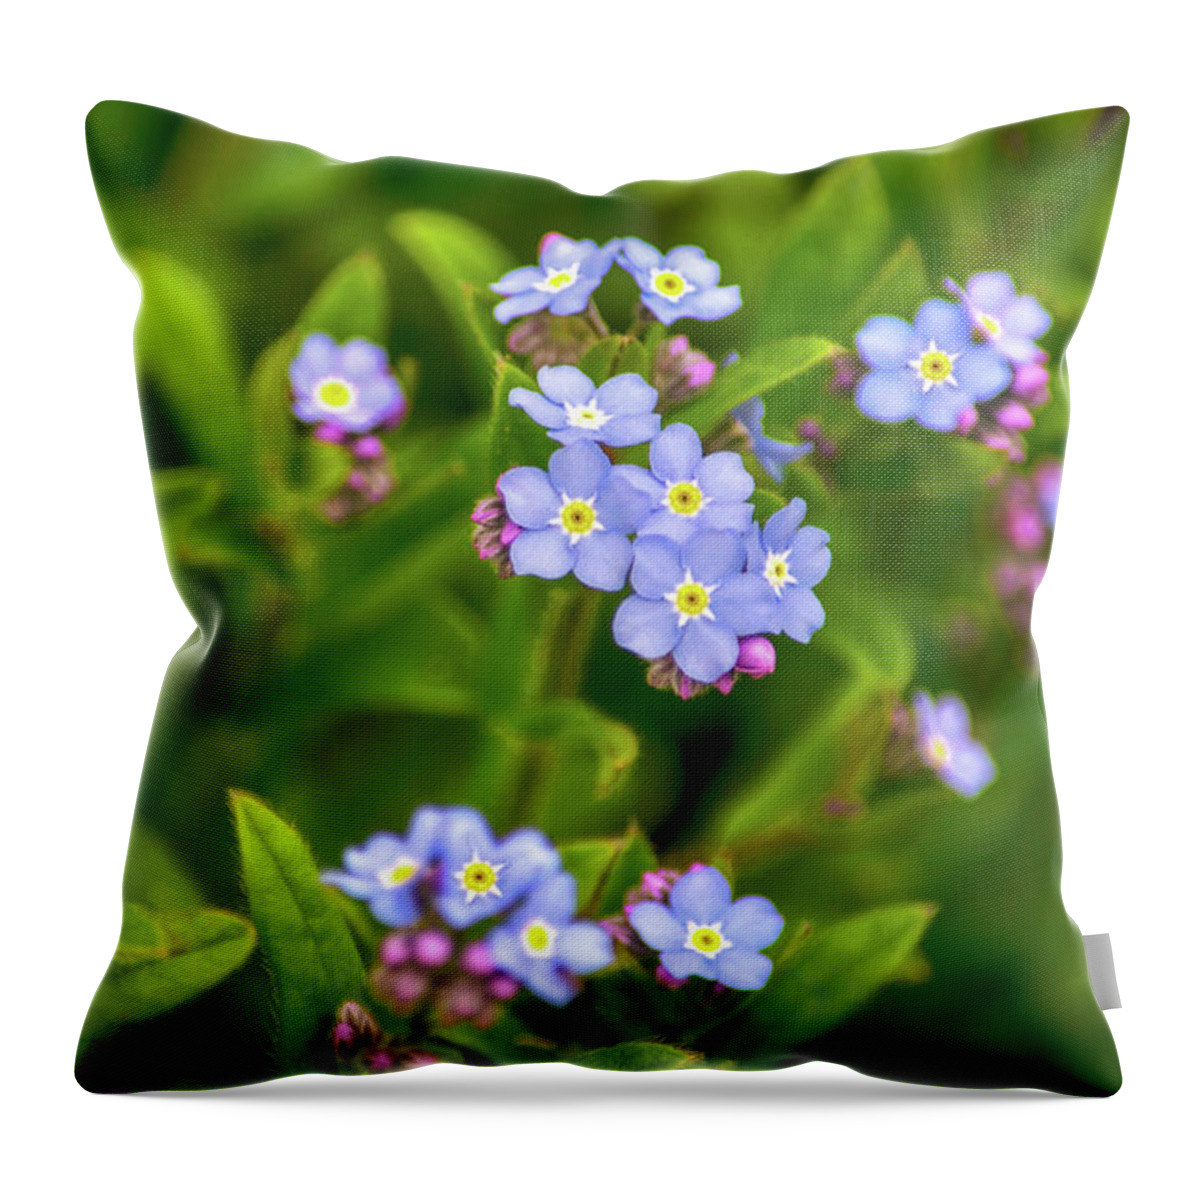 Flowers Throw Pillow featuring the photograph Forget Me Nots by Christina Rollo